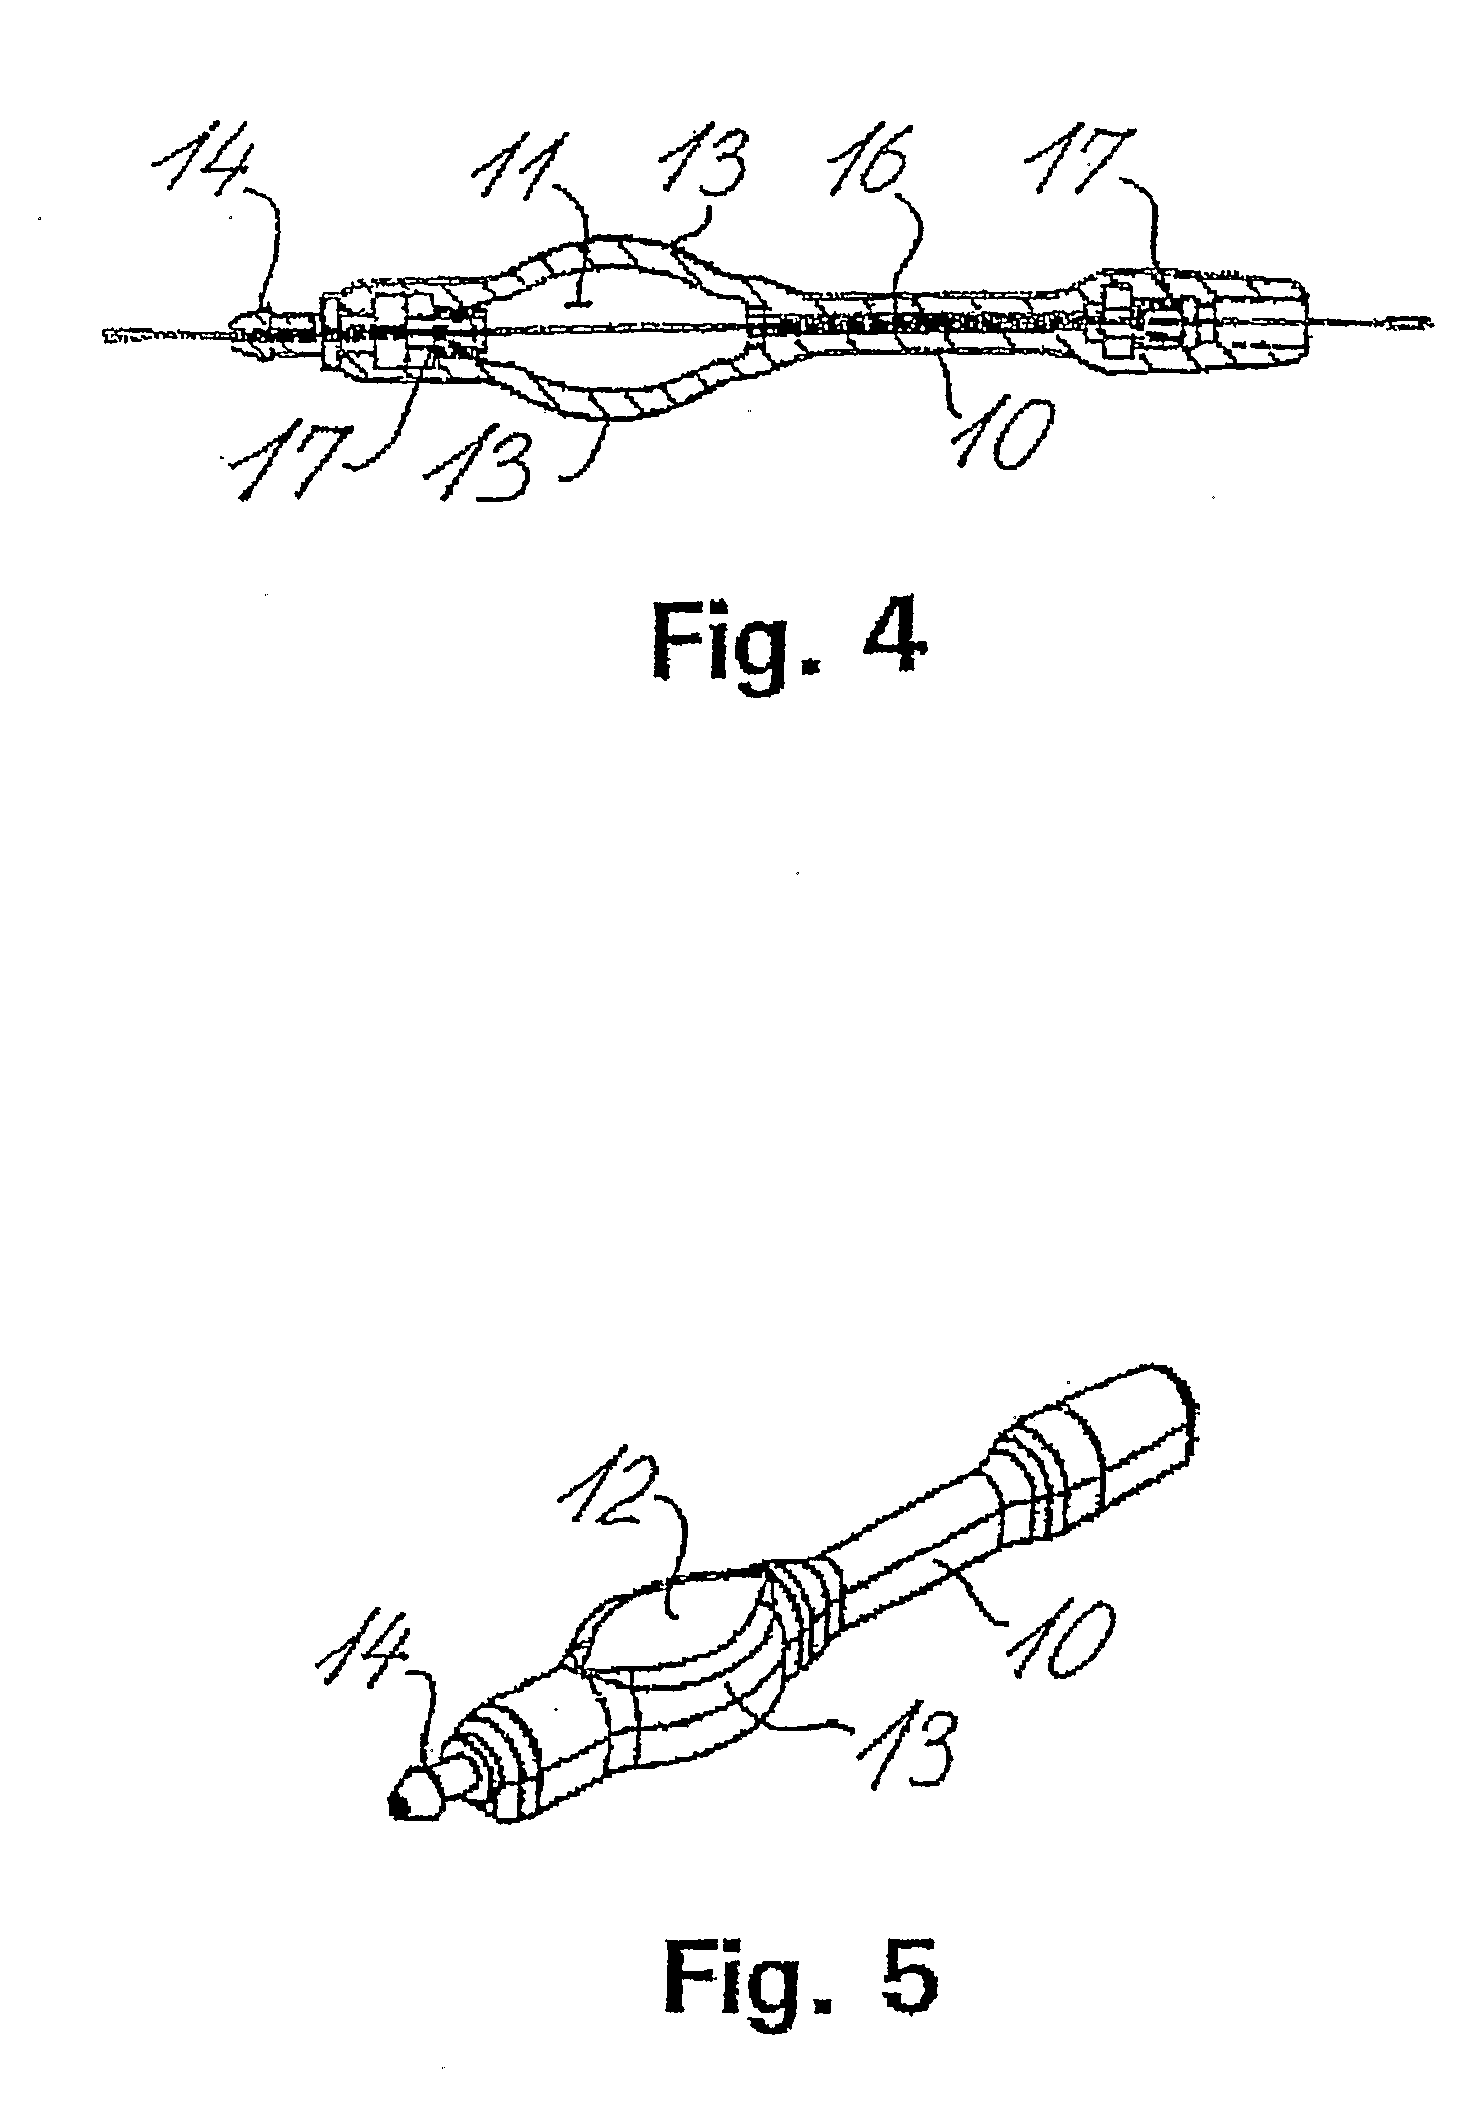 Shunt system with coating and flow restricting component exerting a passive and essentially constant resistance to outflow